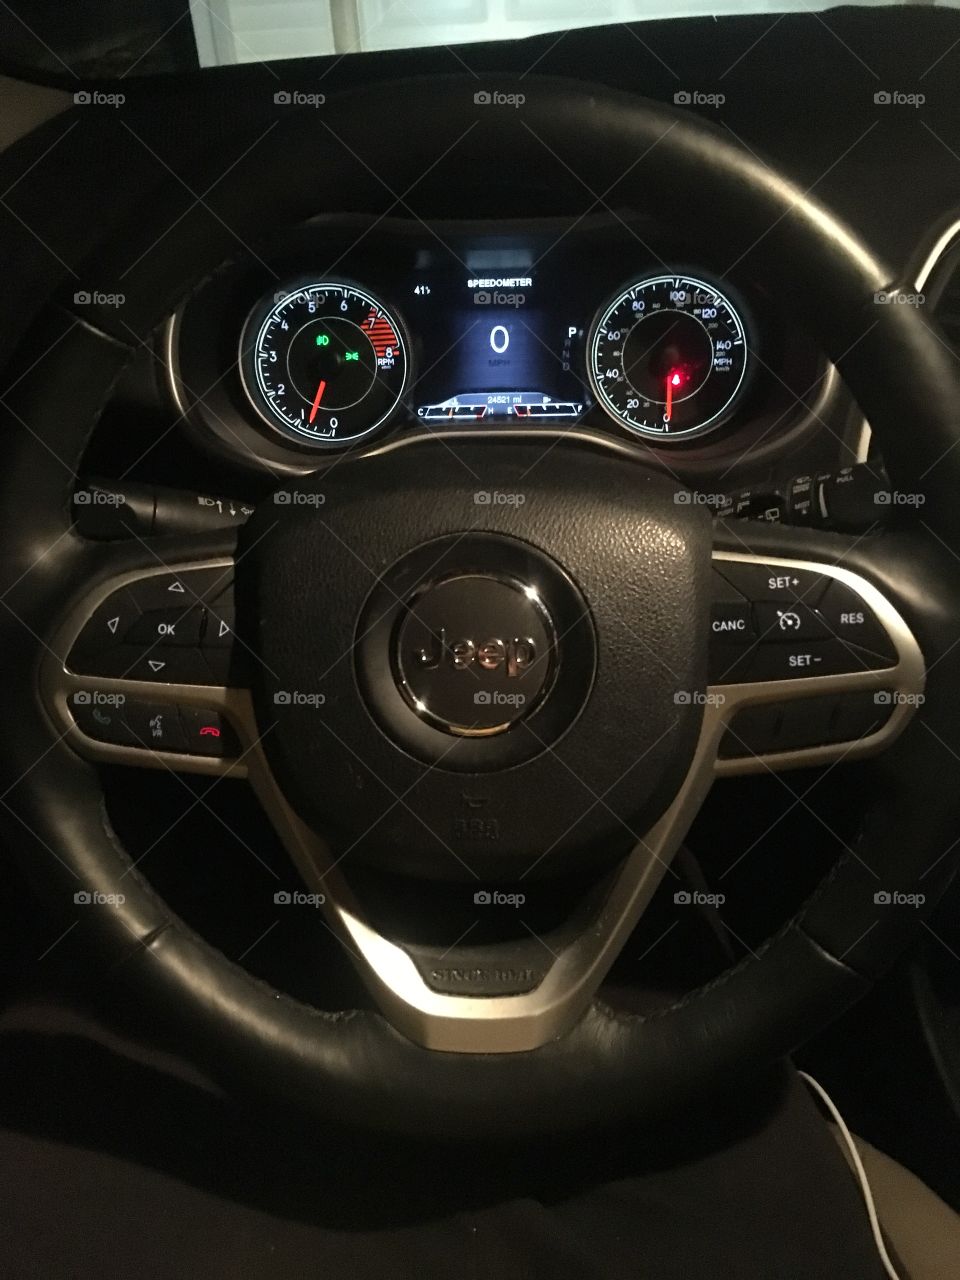 Jeep steering wheel and dash